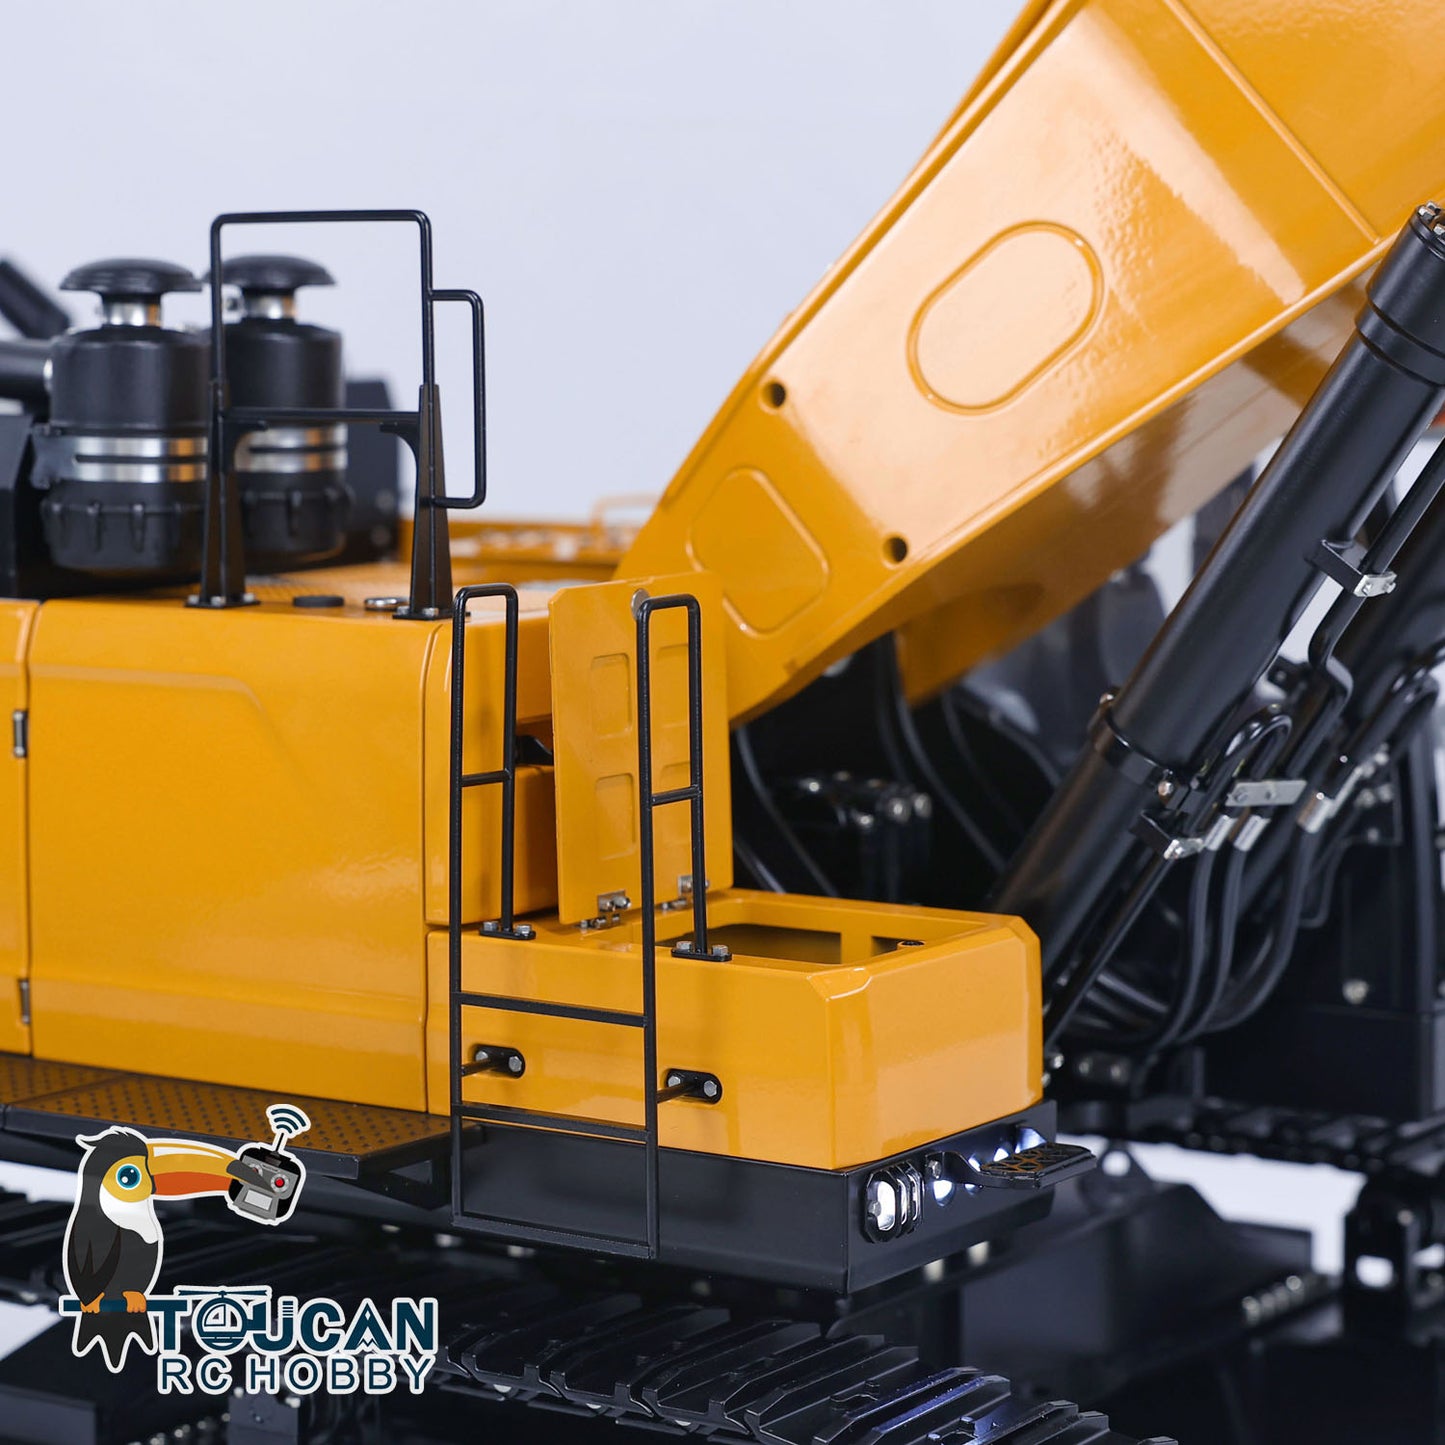 In Stock Kabolite K980 1/14 Hydraulic RC Excavator SY980H Giant PL18 Lite Radio Control Digger Construction Vehicle DIY Simultion Car Toy